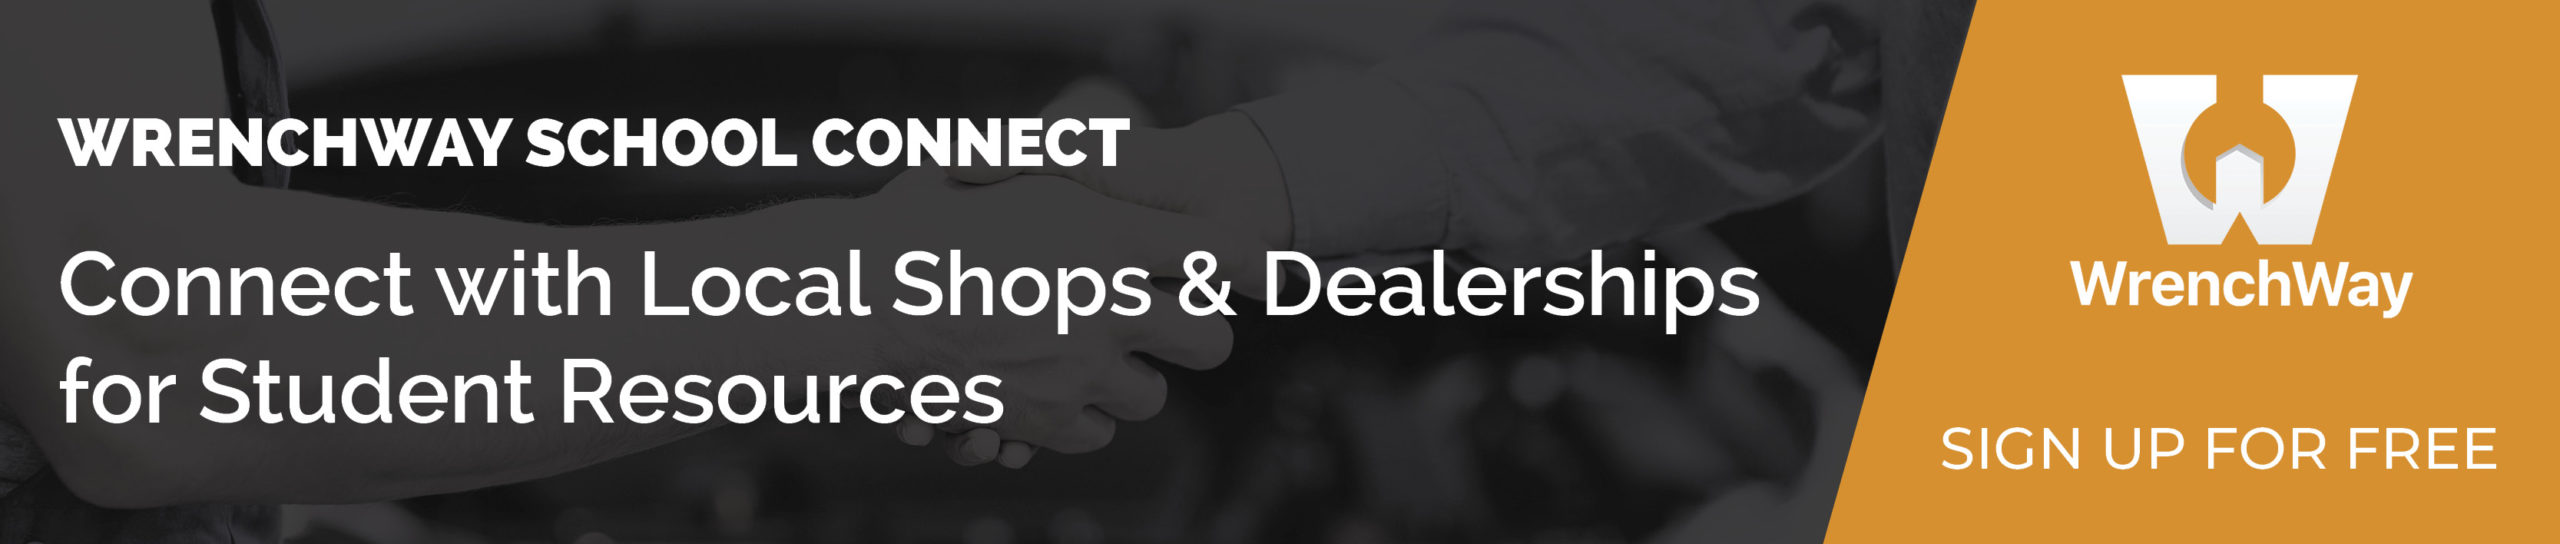 WrenchWay School Connect is a free tool that makes it easier for schools to connect with local shops and dealerships. Click here to sign up for free.